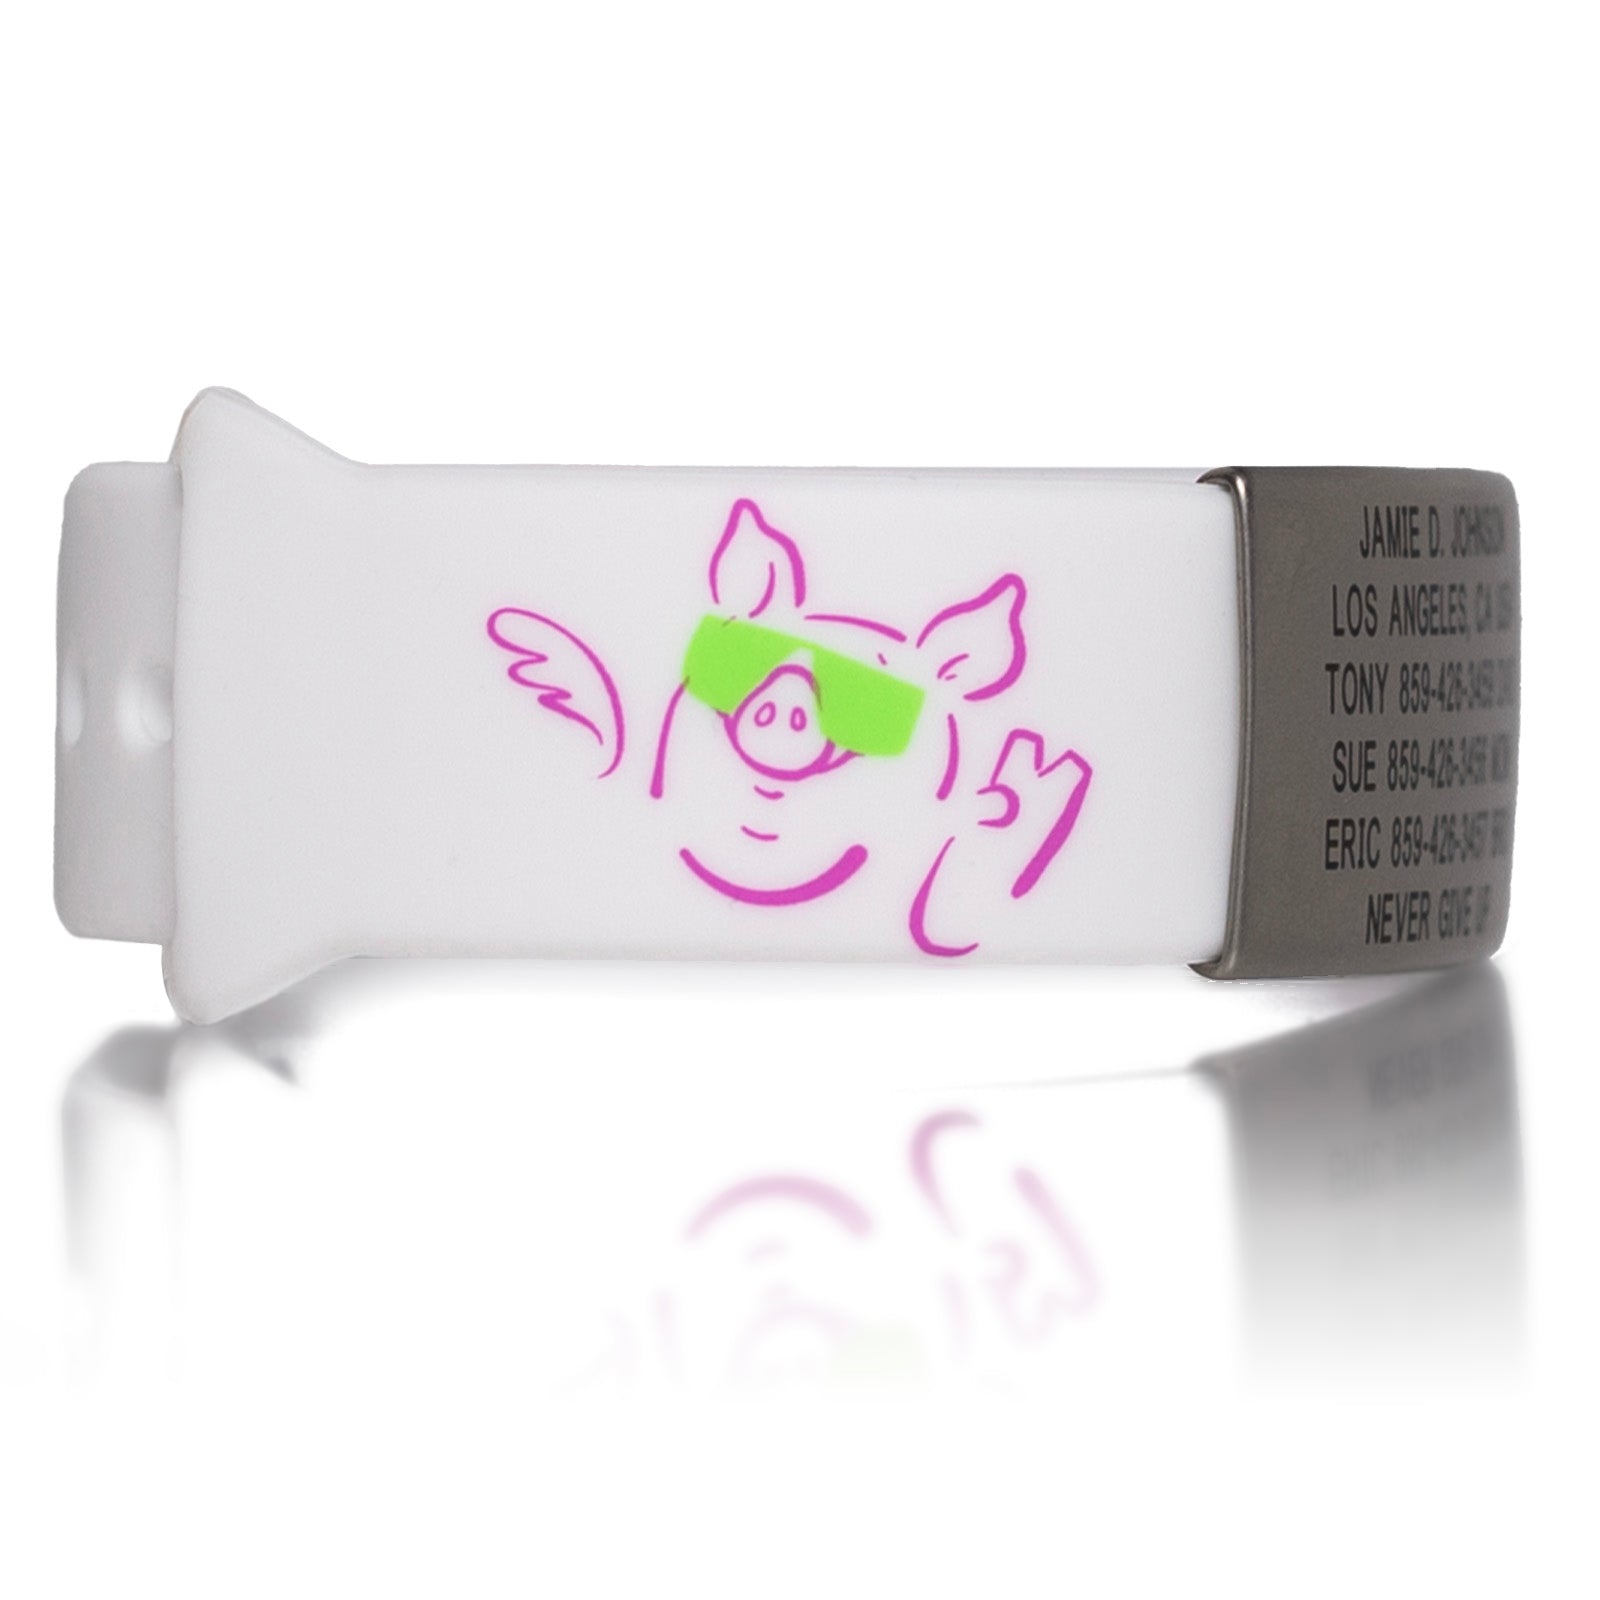 Special Edition Flying Pig ID - With Profile ID  - ROAD iD